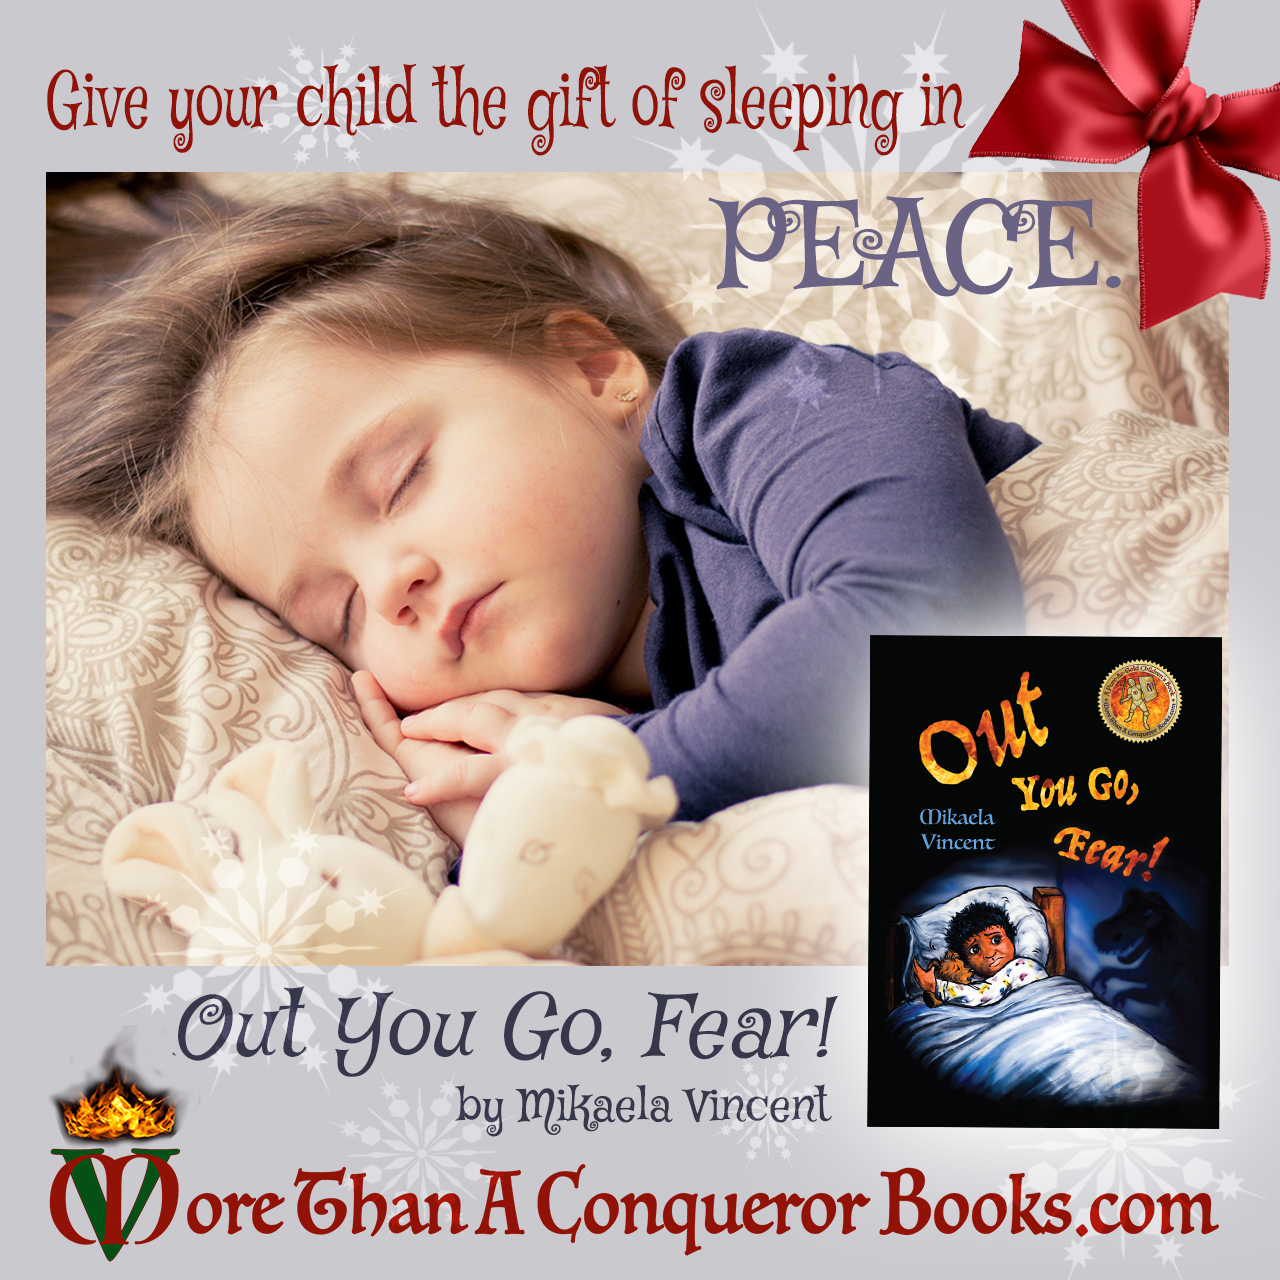 Christmas-Give your child the gift of sleeping in peac-Out You Go Fear-Mikaela Vincent-MoreThanAConquerorBooks.jpg